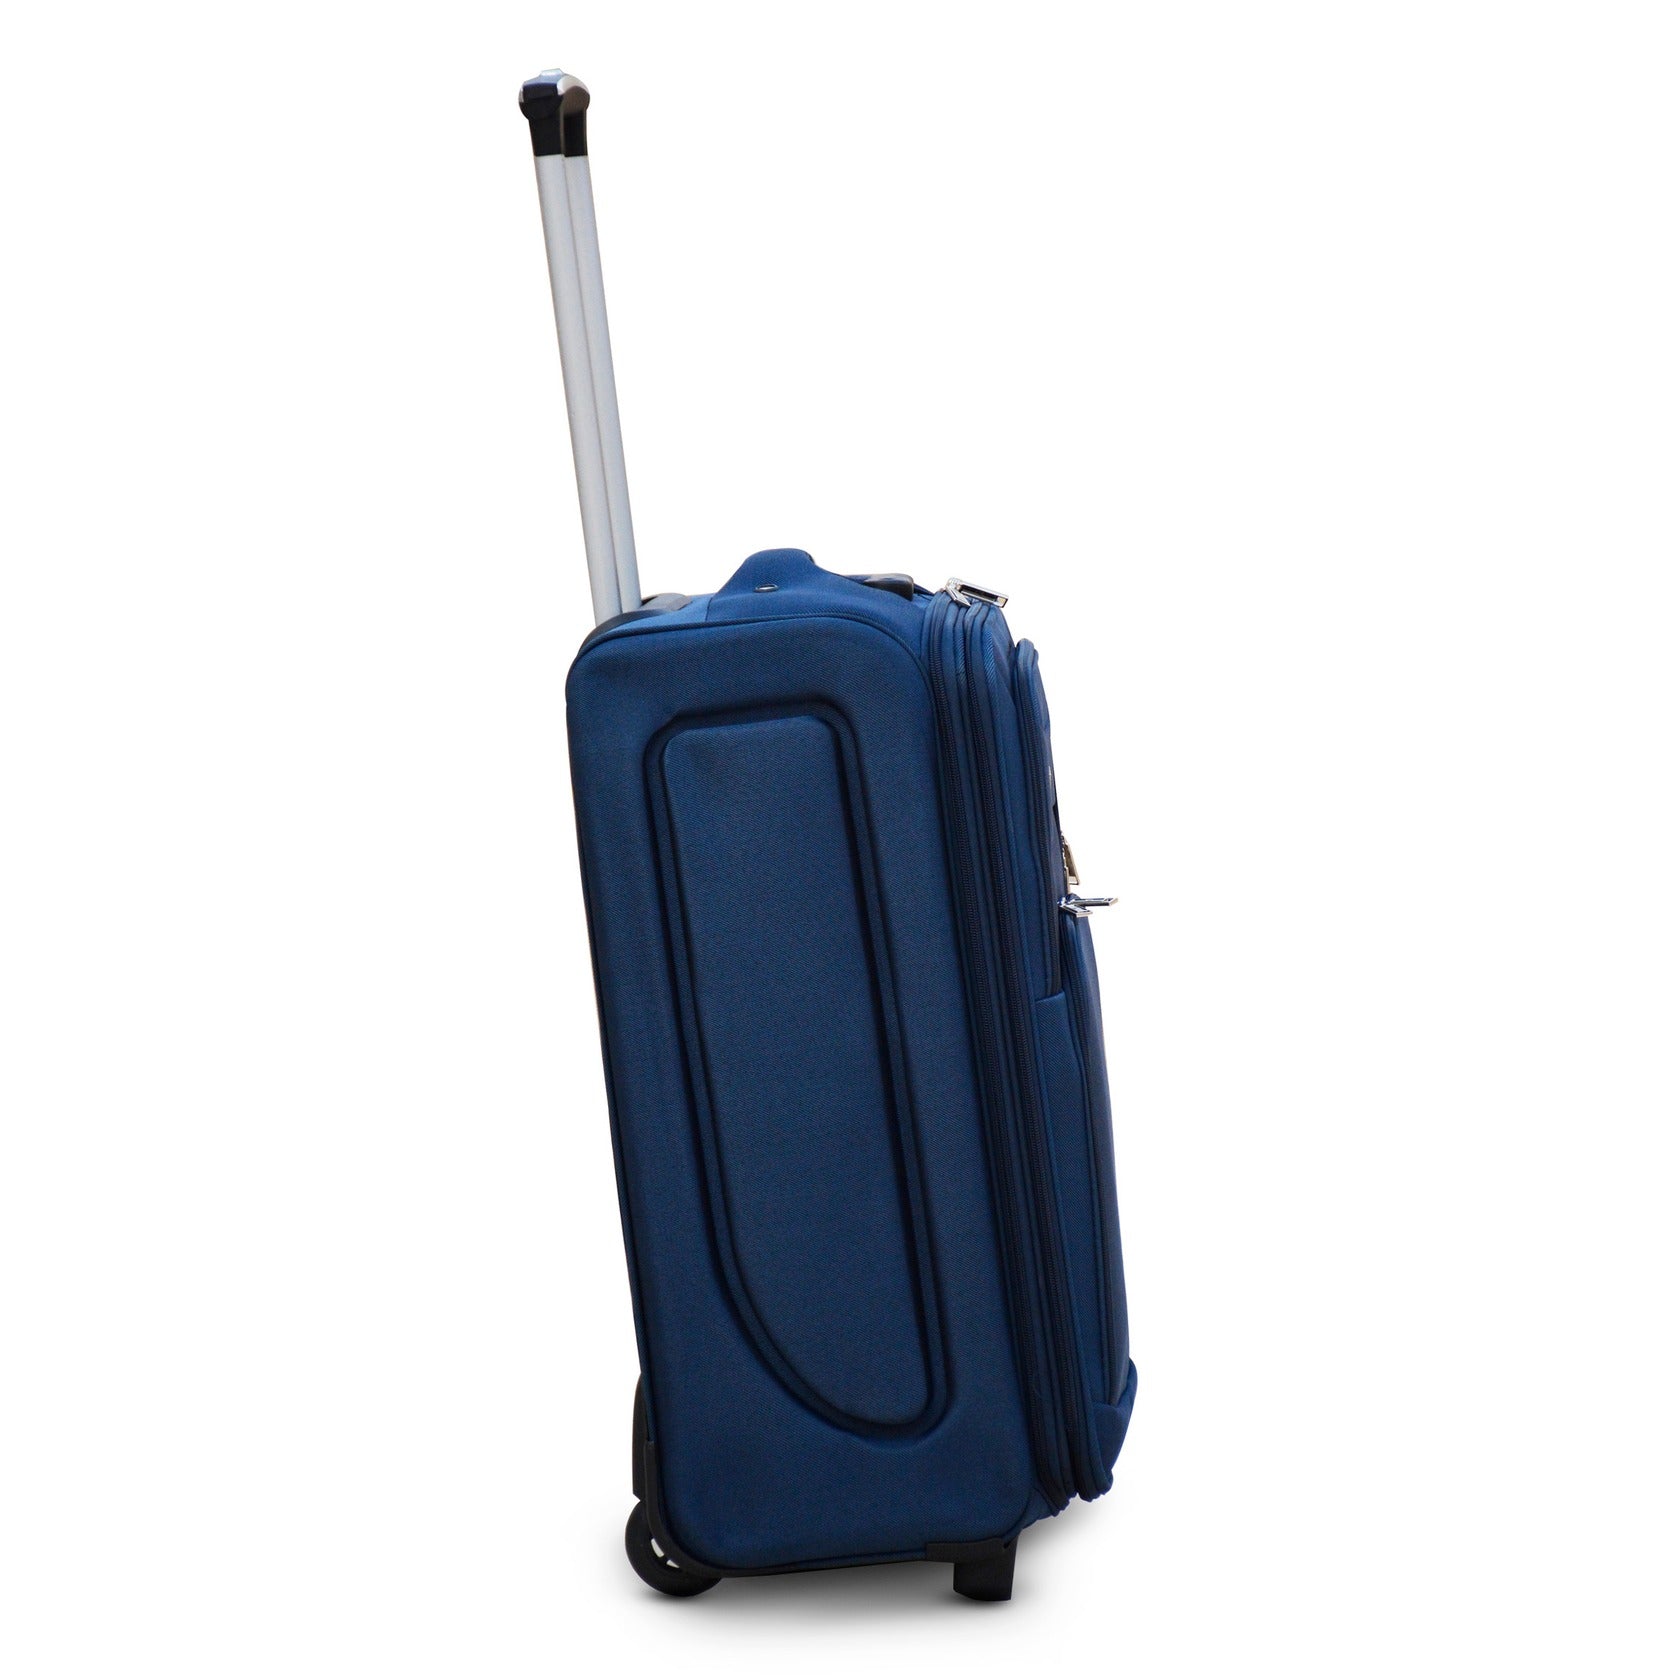 28" Blue Colour LP 2 Wheel 0161 Luggage Lightweight Soft Material Trolley Bag